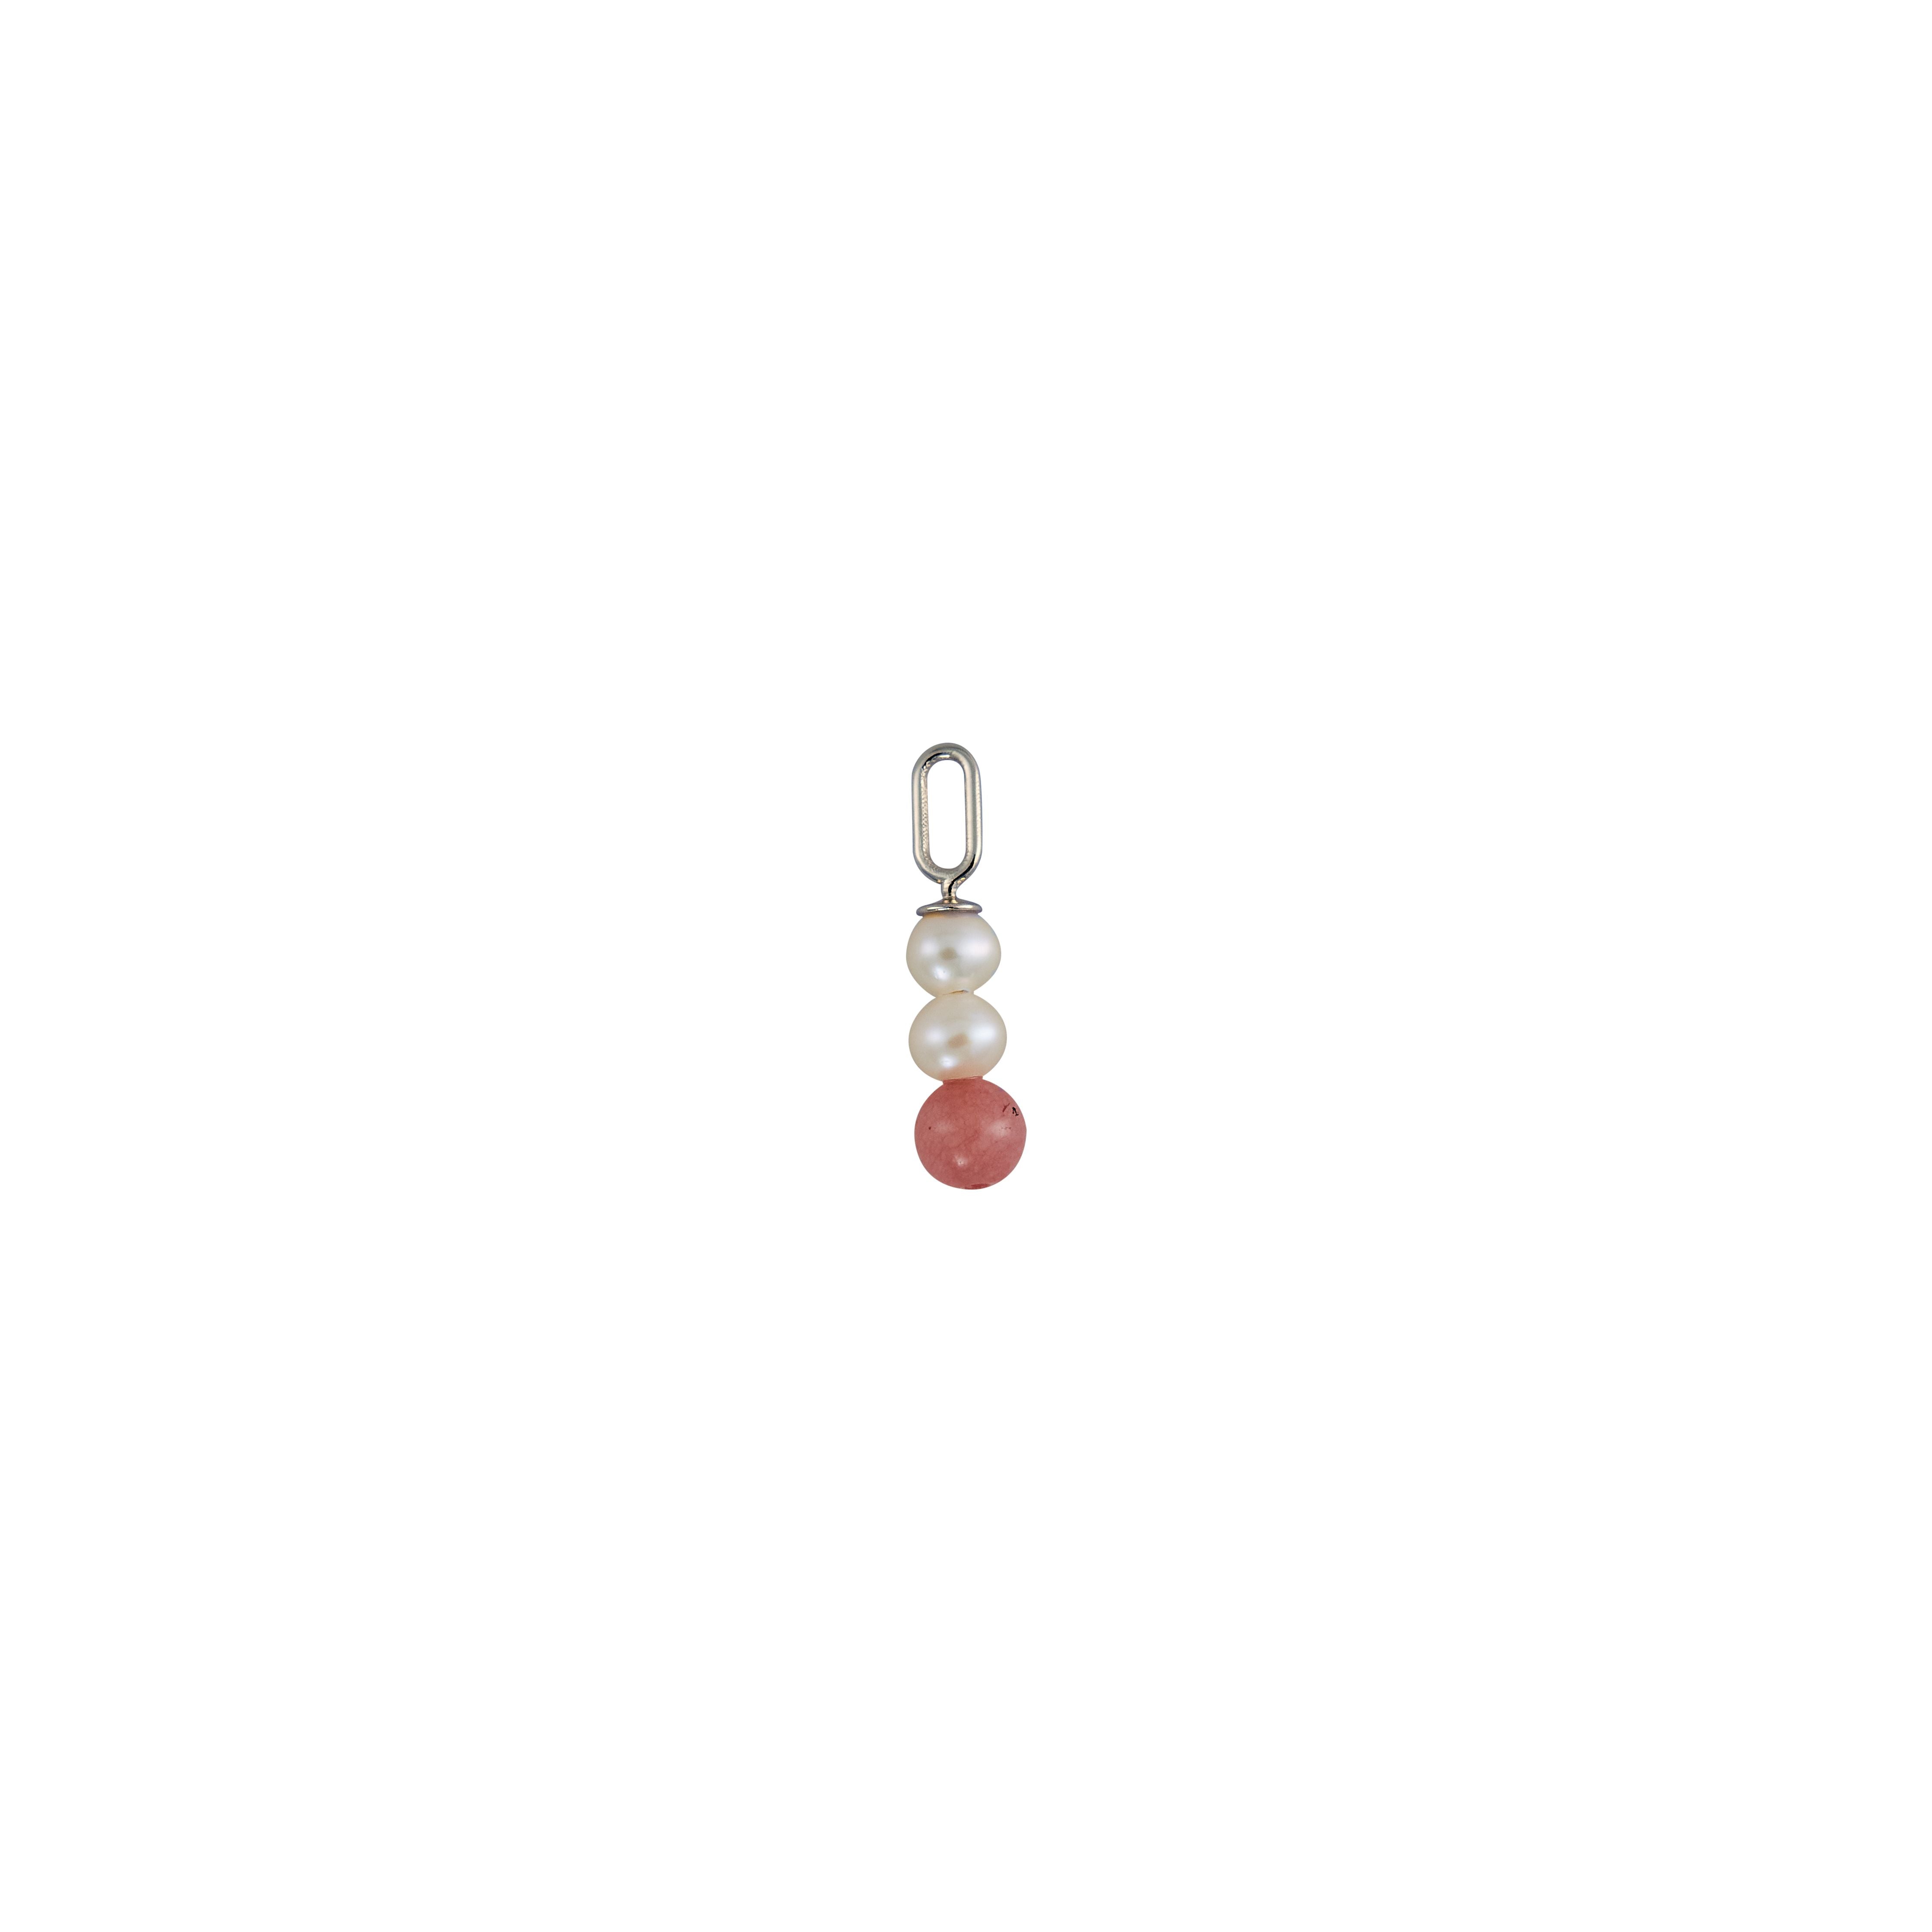 Design Letters Pearl Stick Charm 4 Mm Pendant Silver Plated, Red Chrosite